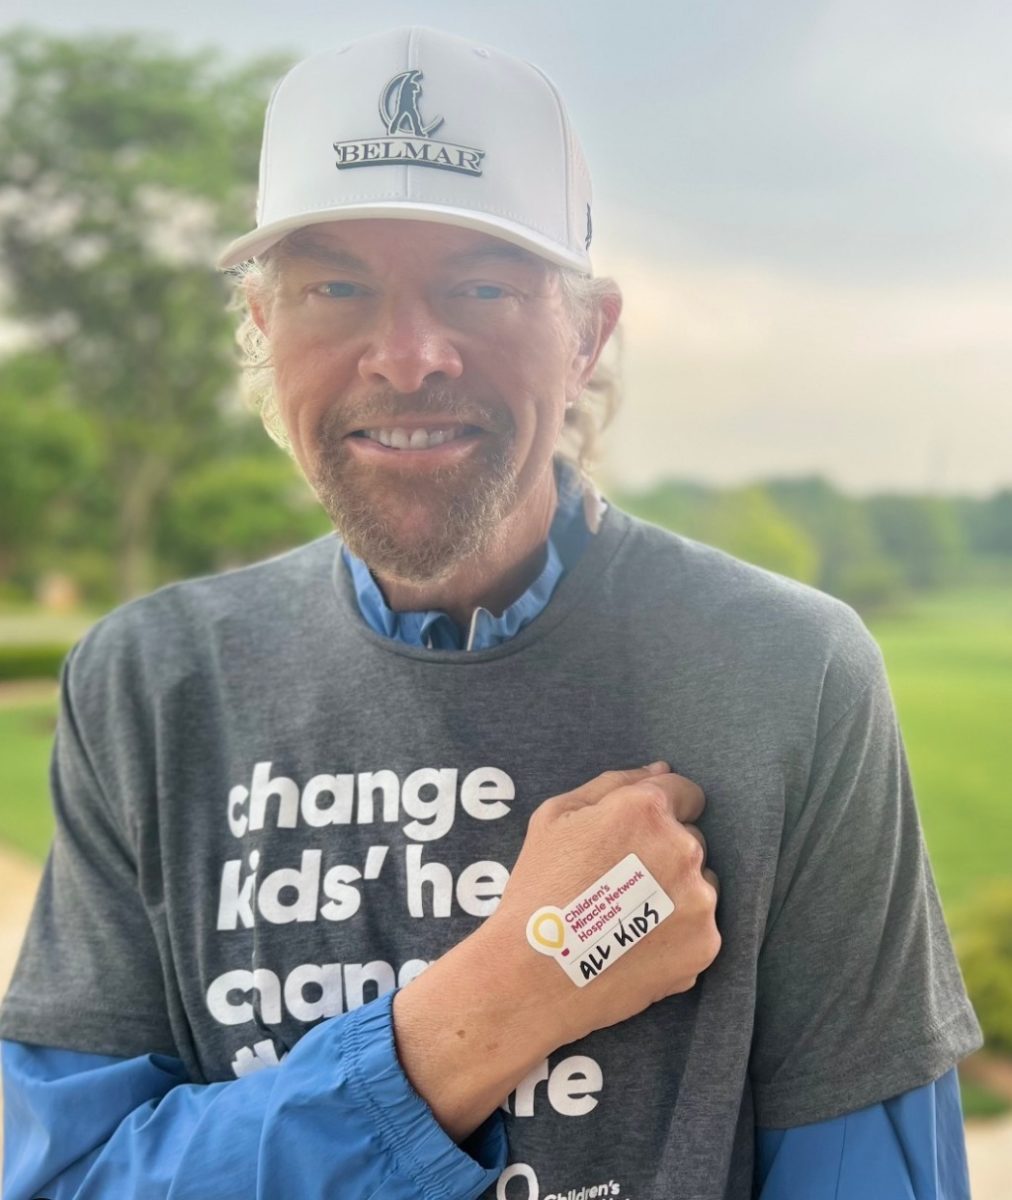 Toby Keith Shared His Last Instagram Post One Day Before He Passed Away | Just one day before Toby Keith's family announced his passing at 62 years, he shared a video of himself on Instagram.